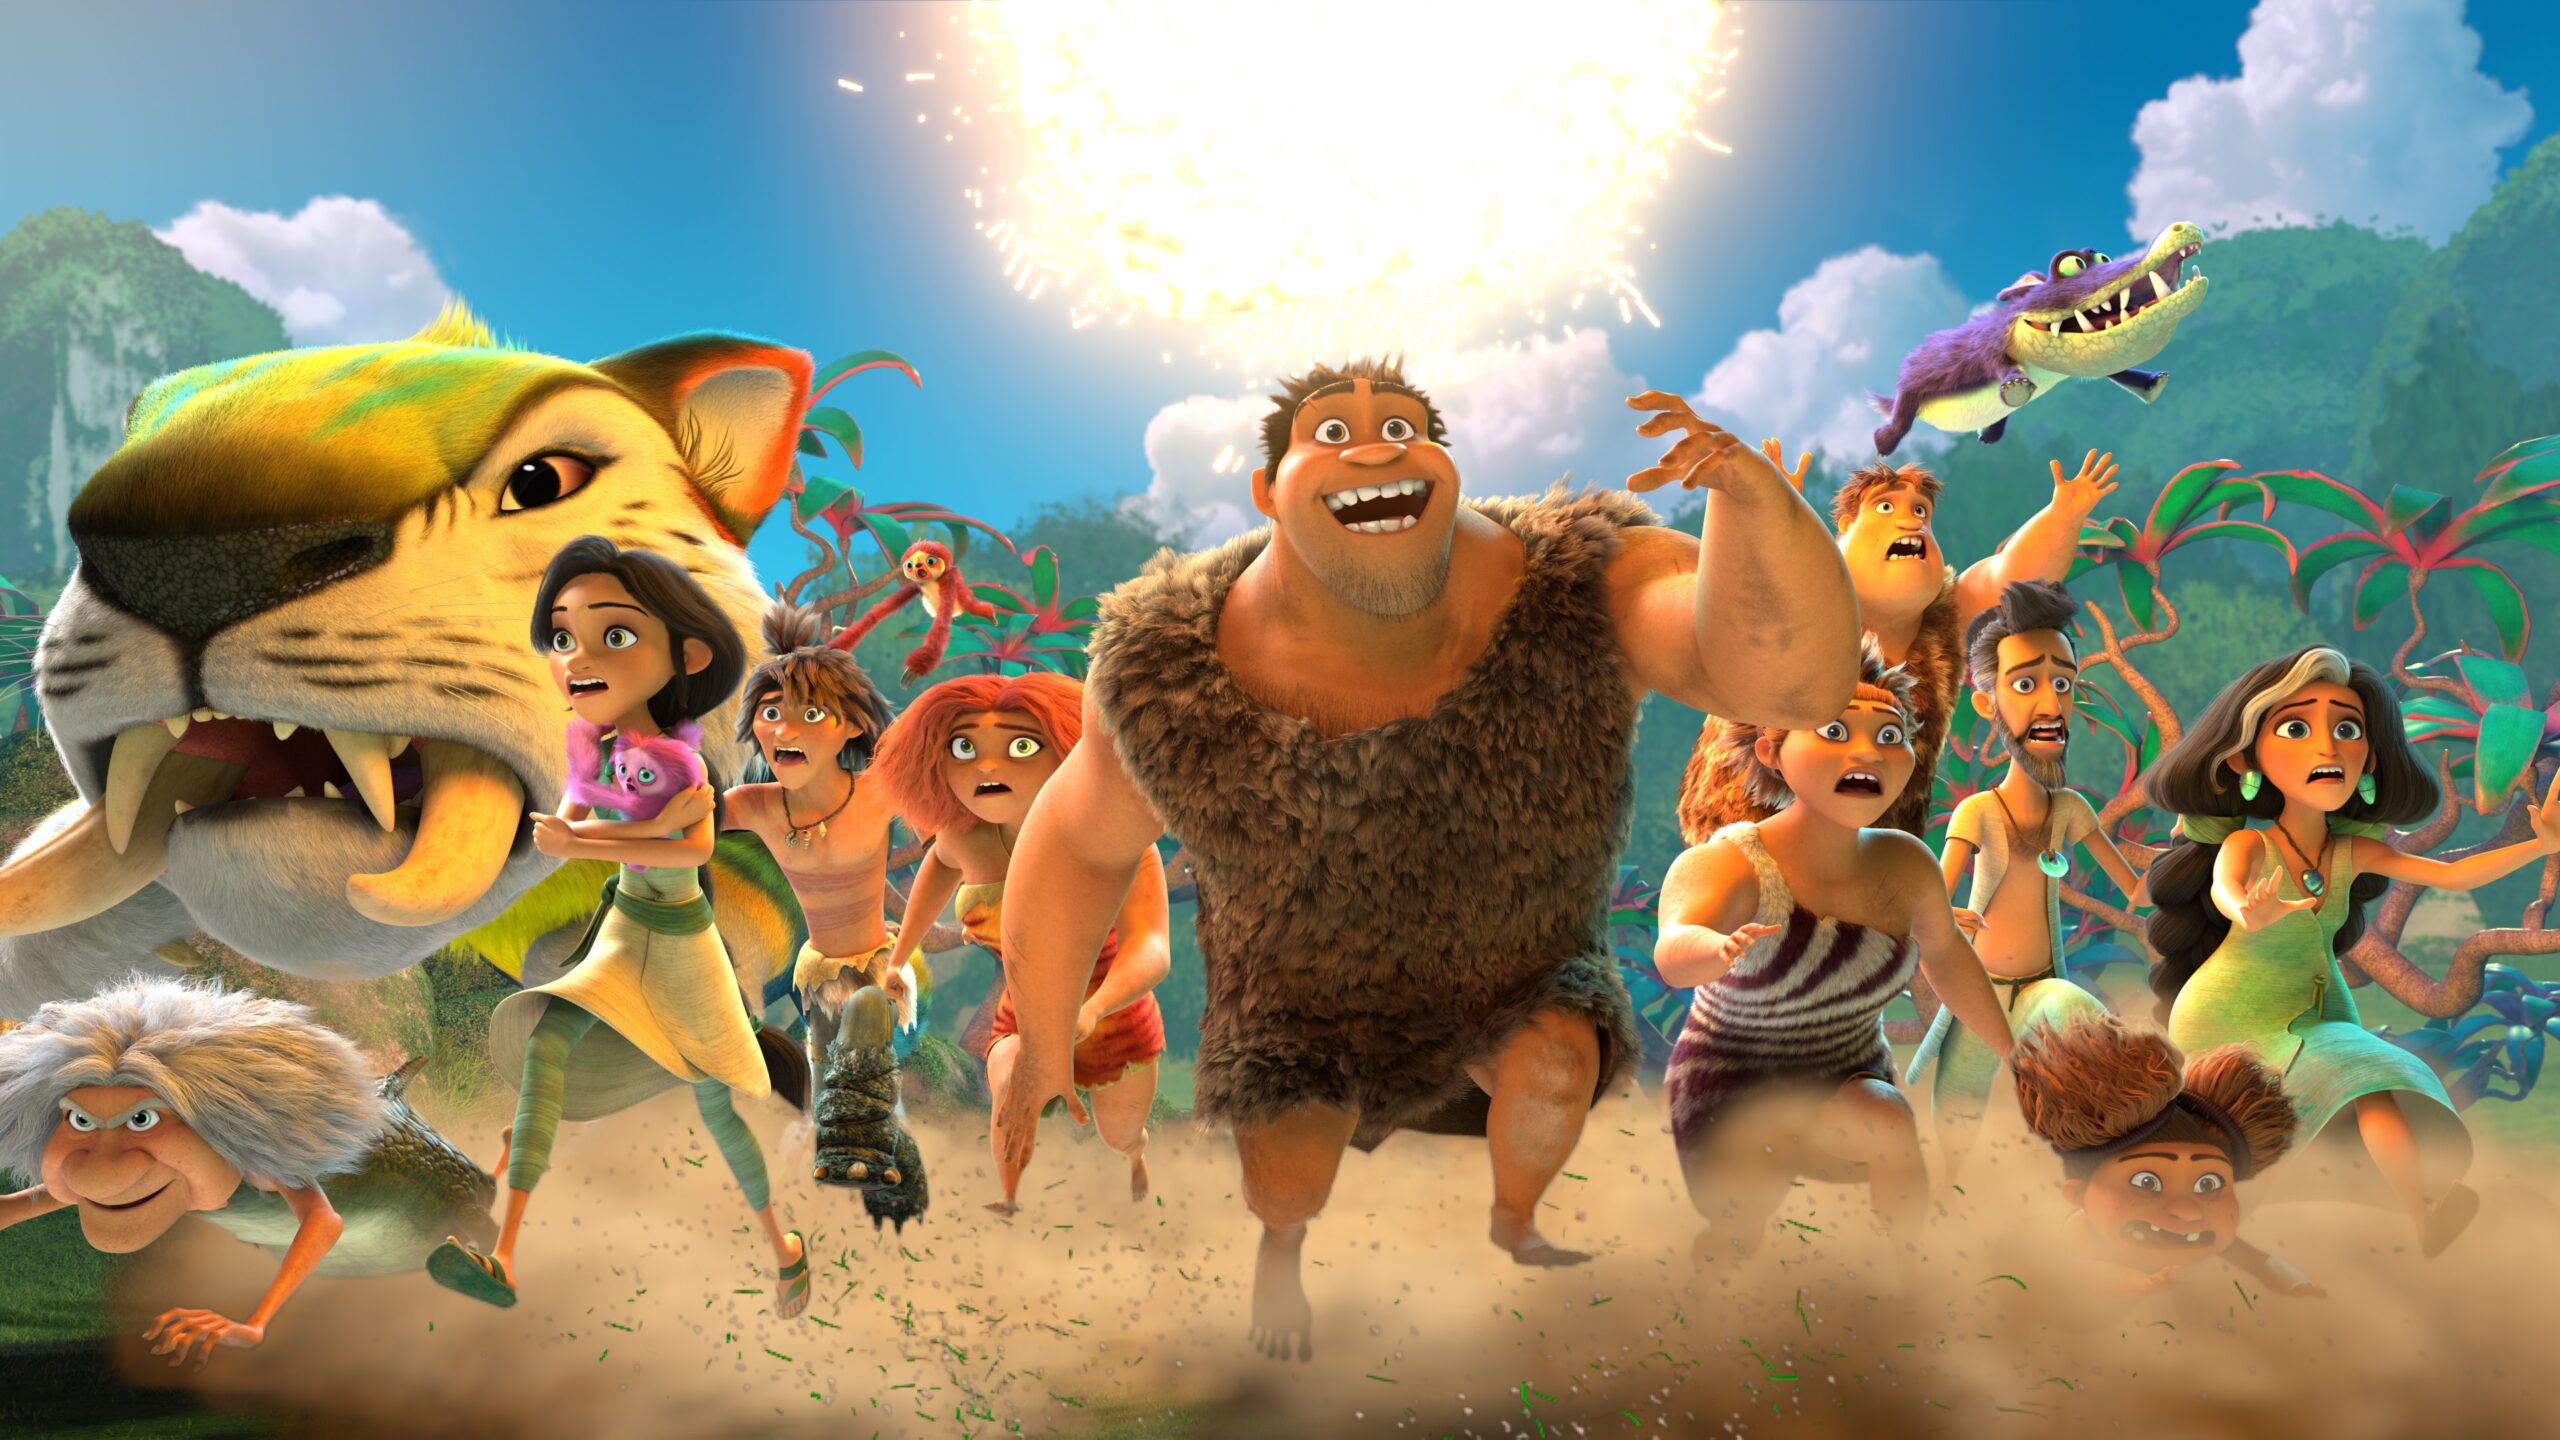 The Croods Beyond Disney+: Where to Stream, Cast Buzz, and Why Everyone's Talking About It